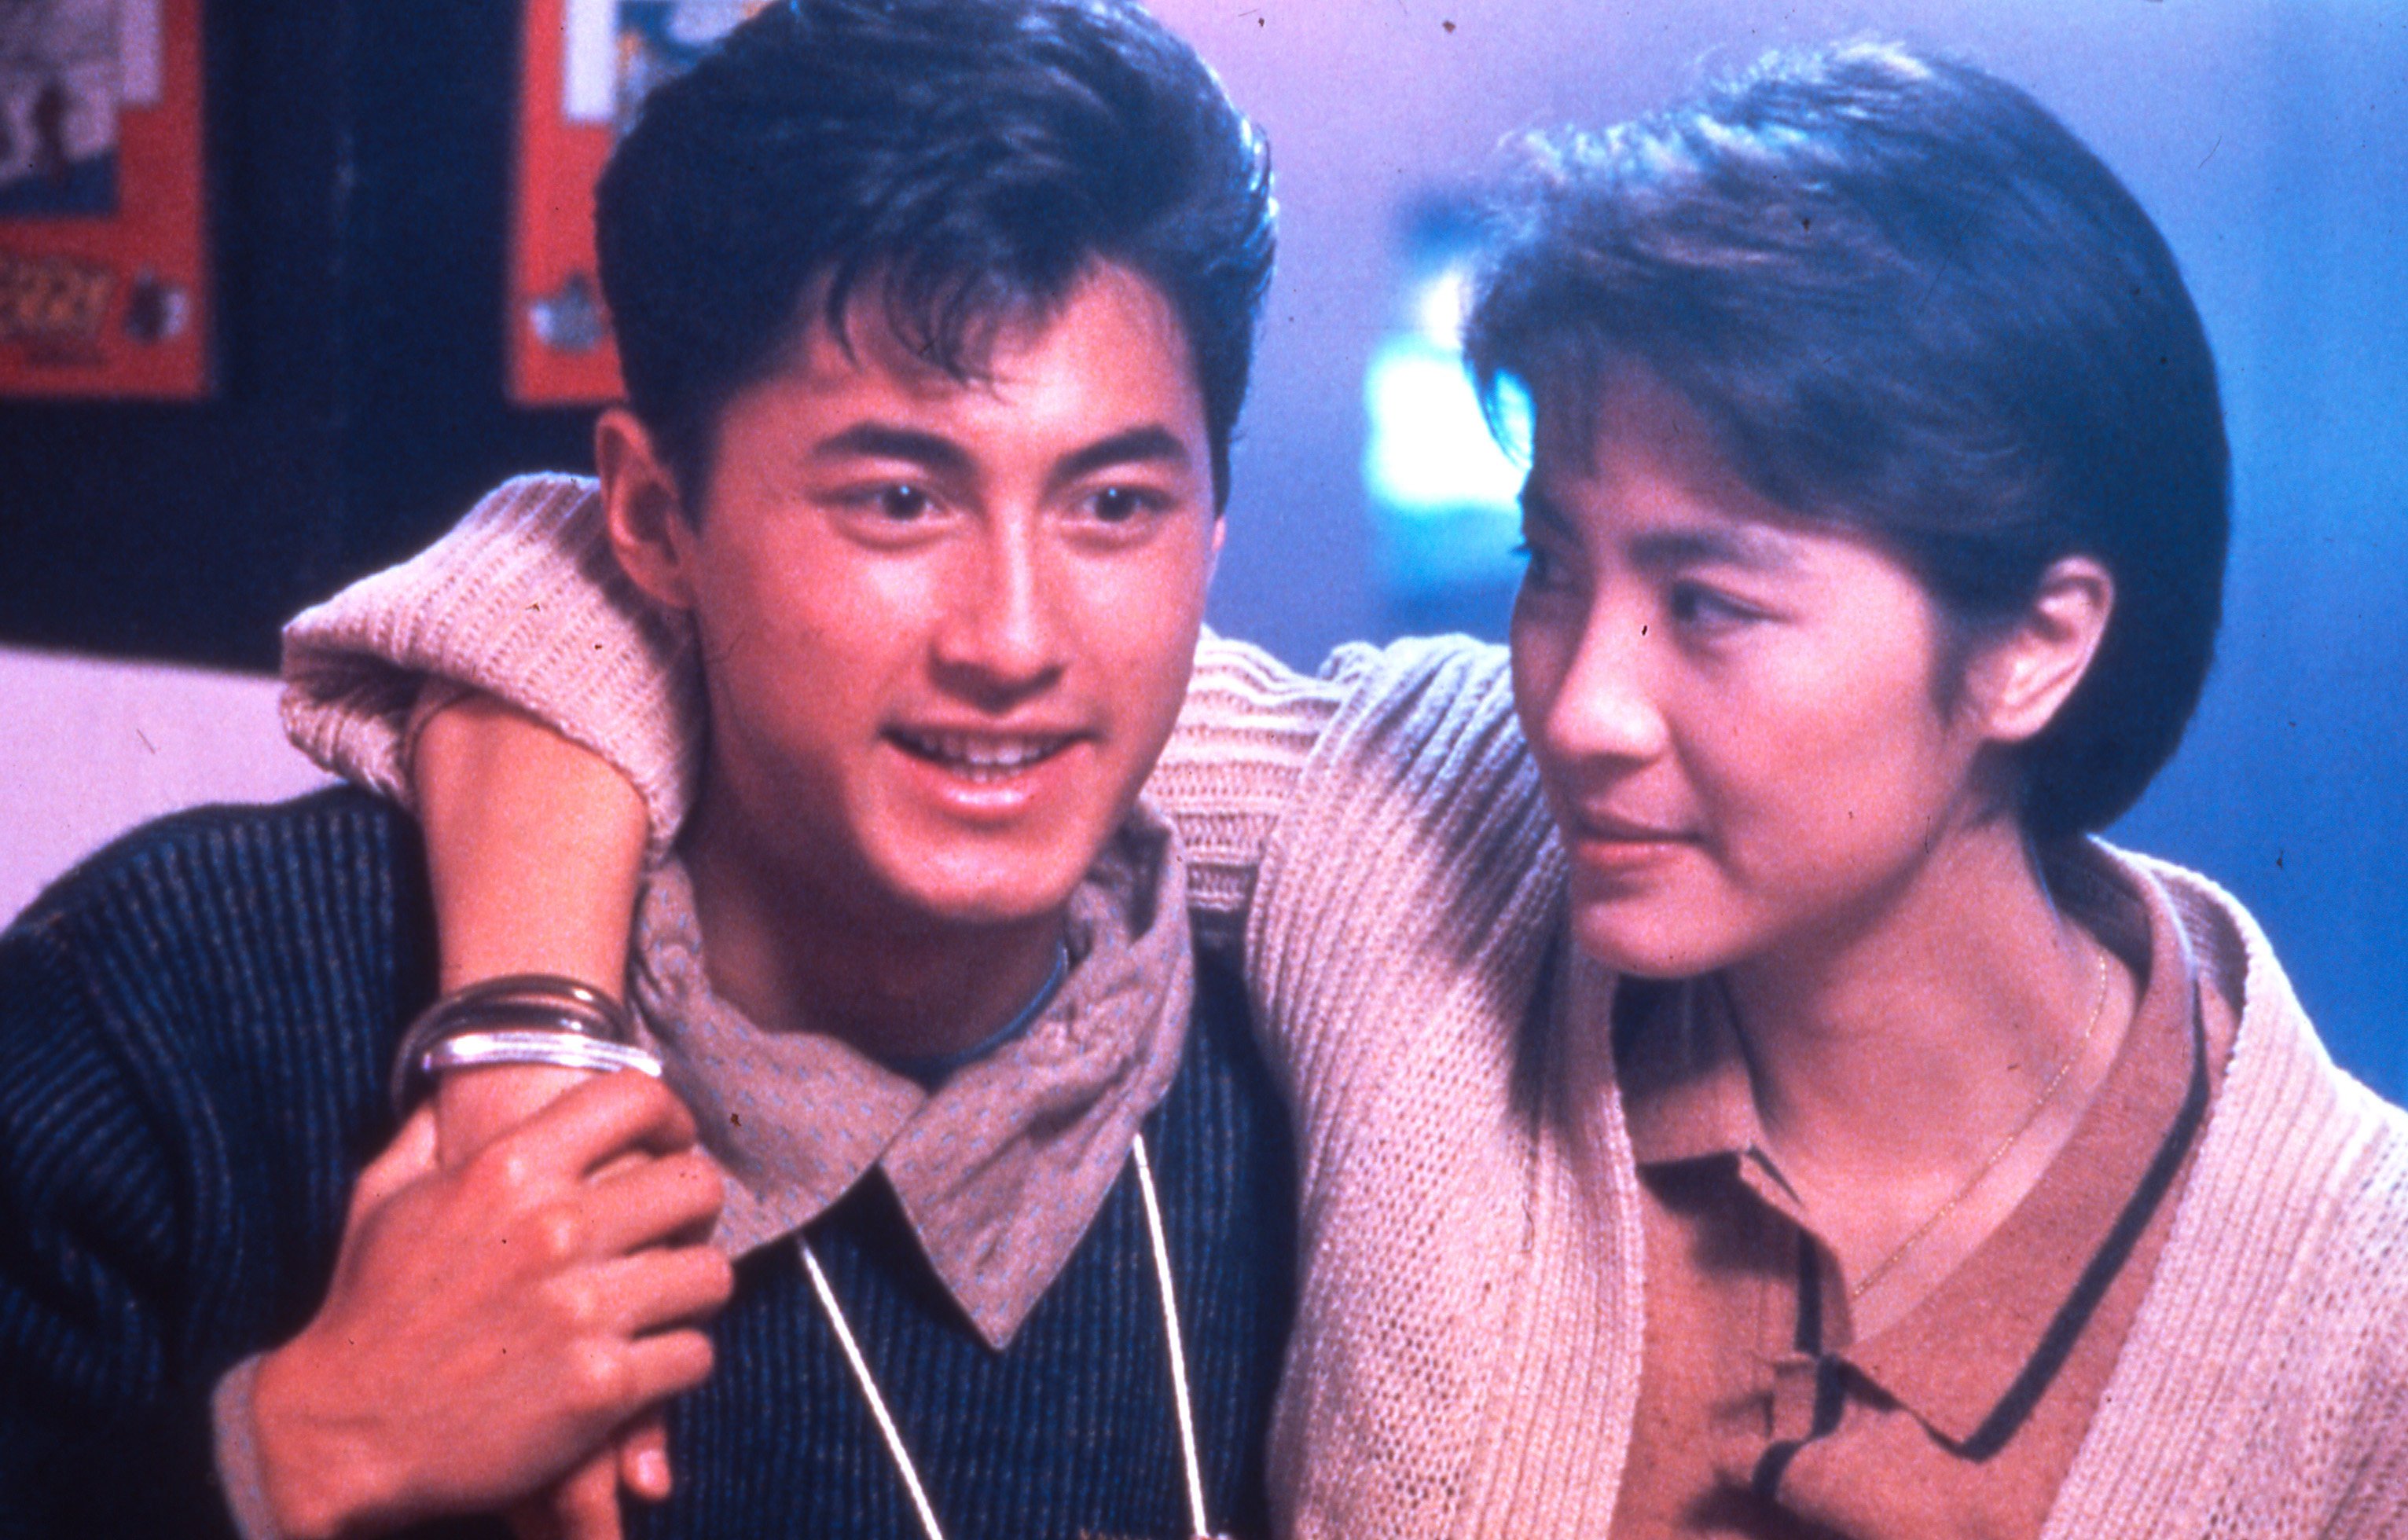 Michael Wong and Michelle Yeoh in a still from “Royal Warriors” (1986), in which Wong got his first big break. Because of the film, the Chinese-American was typecast as a police officer. Unable to speak Cantonese, the Hong Kong film industry treated him like a foreigner. Photo: Eureka Entertainment